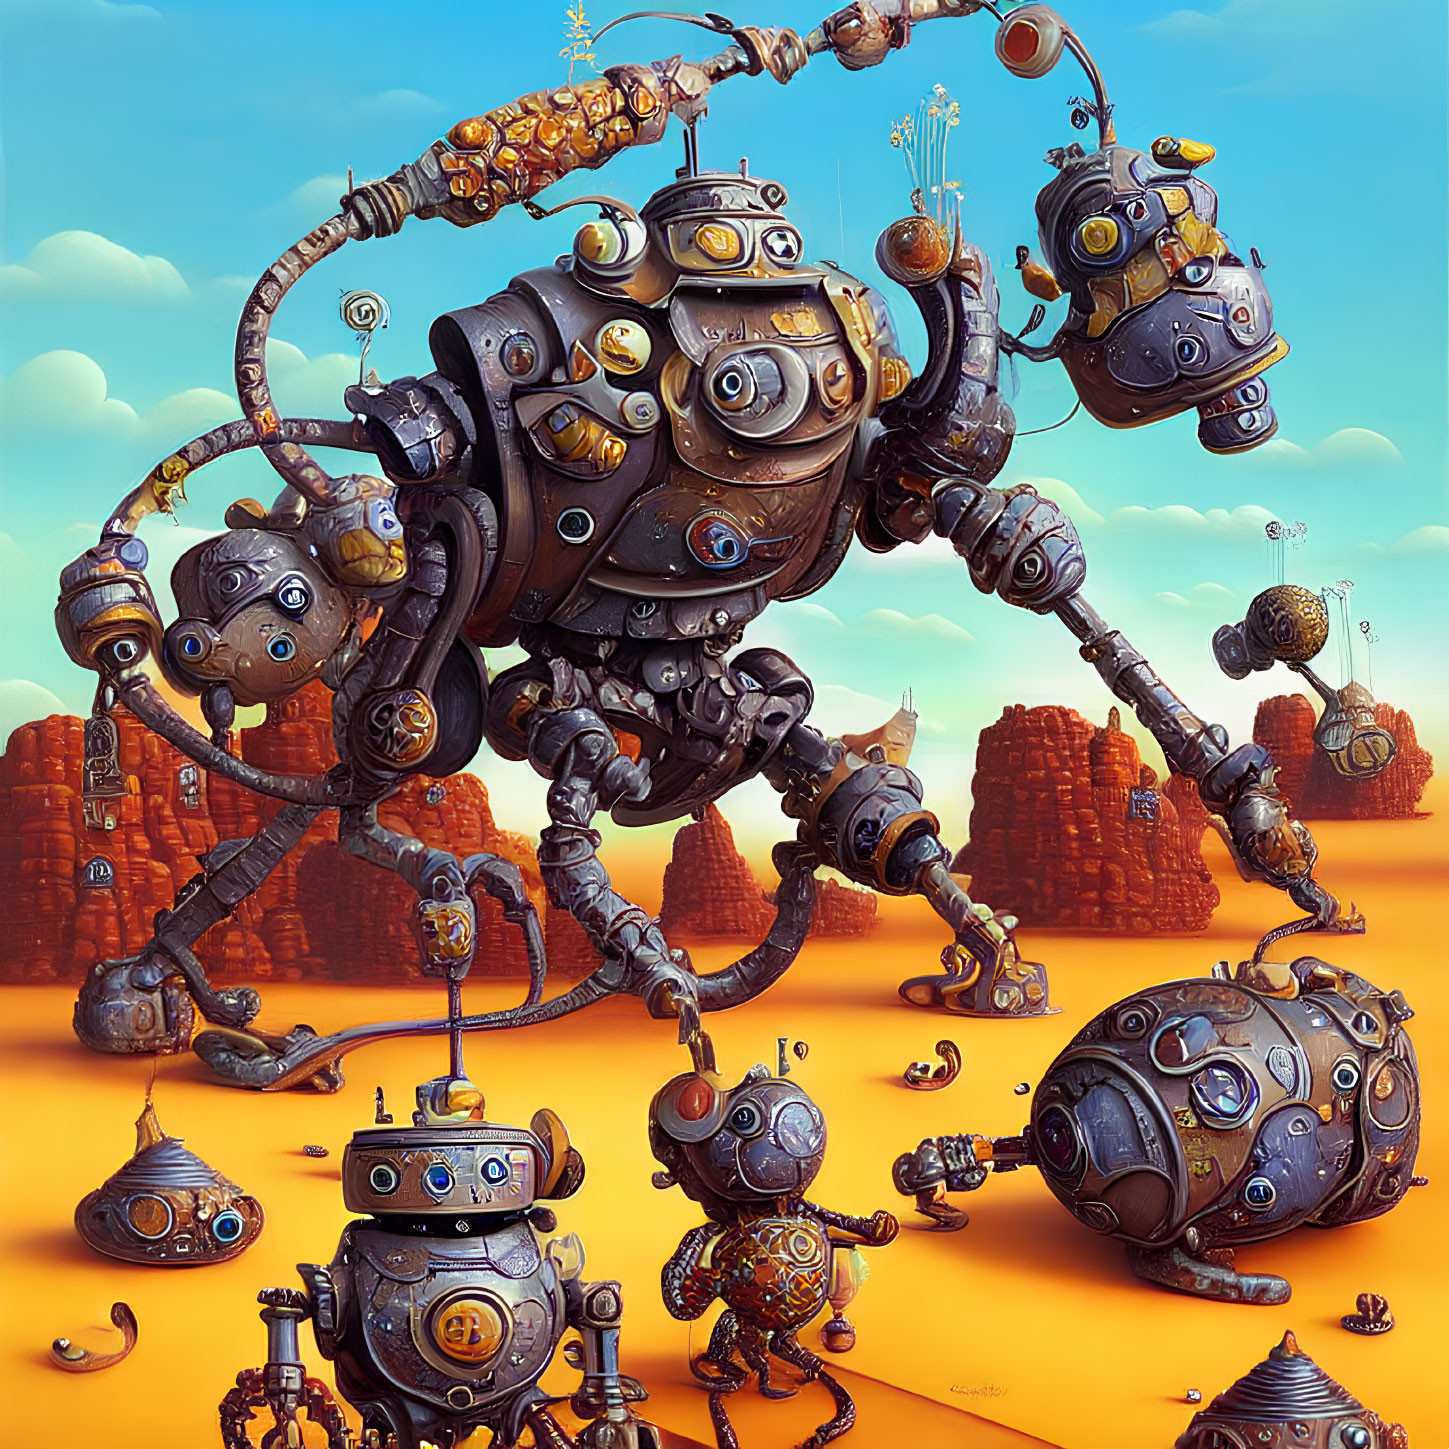 Whimsical mechanical robots in desert landscape with rock formations